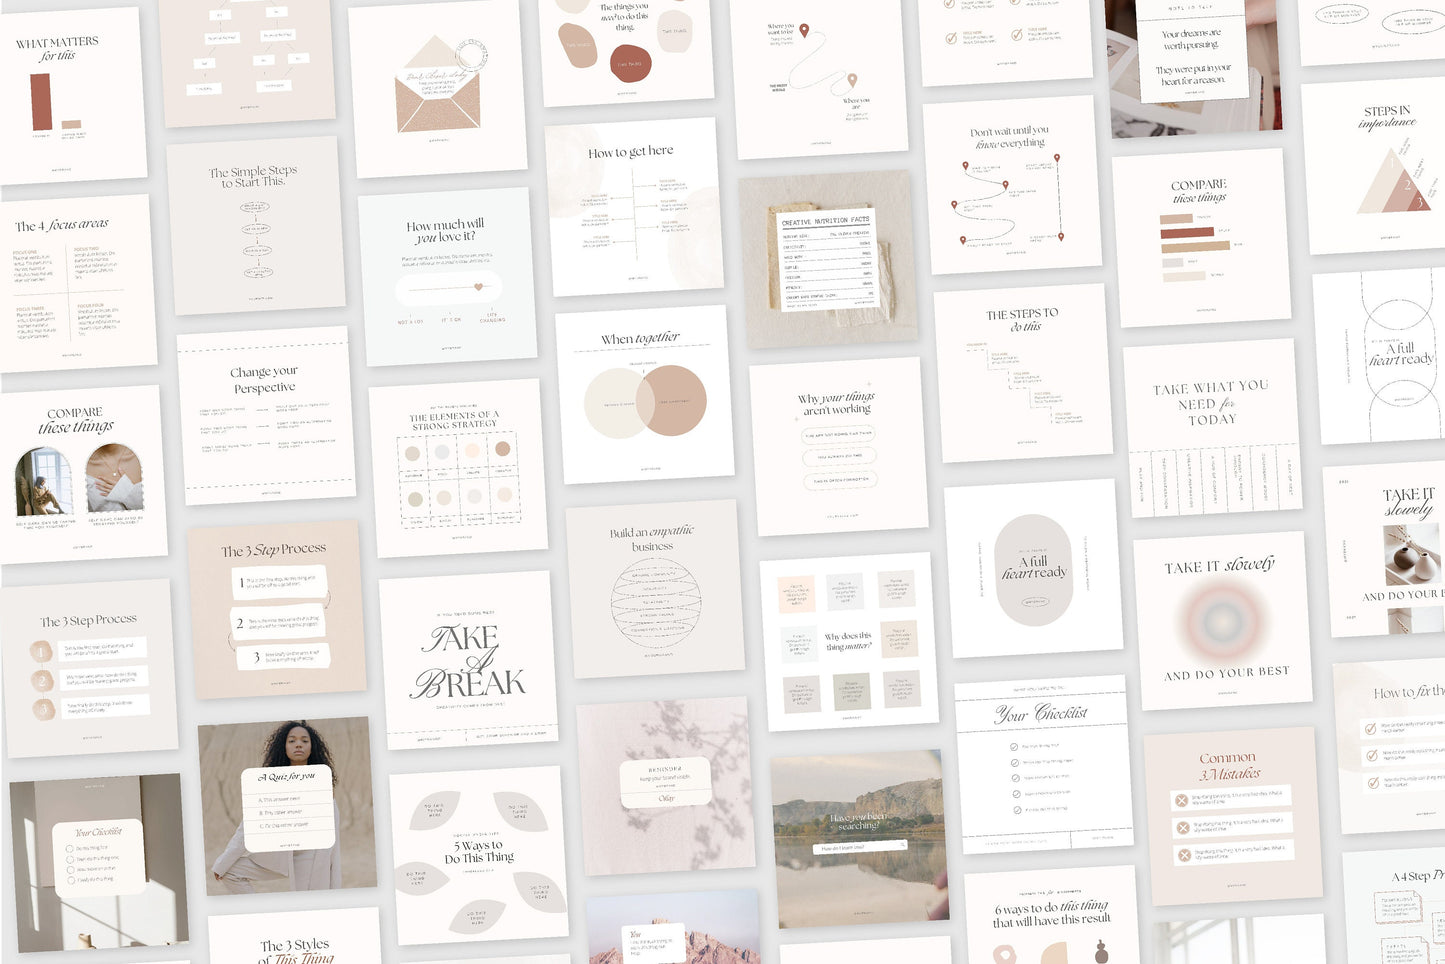 Instagram Shareable Canva Templates 200 Feed and Stories Graphics (Digital Download)